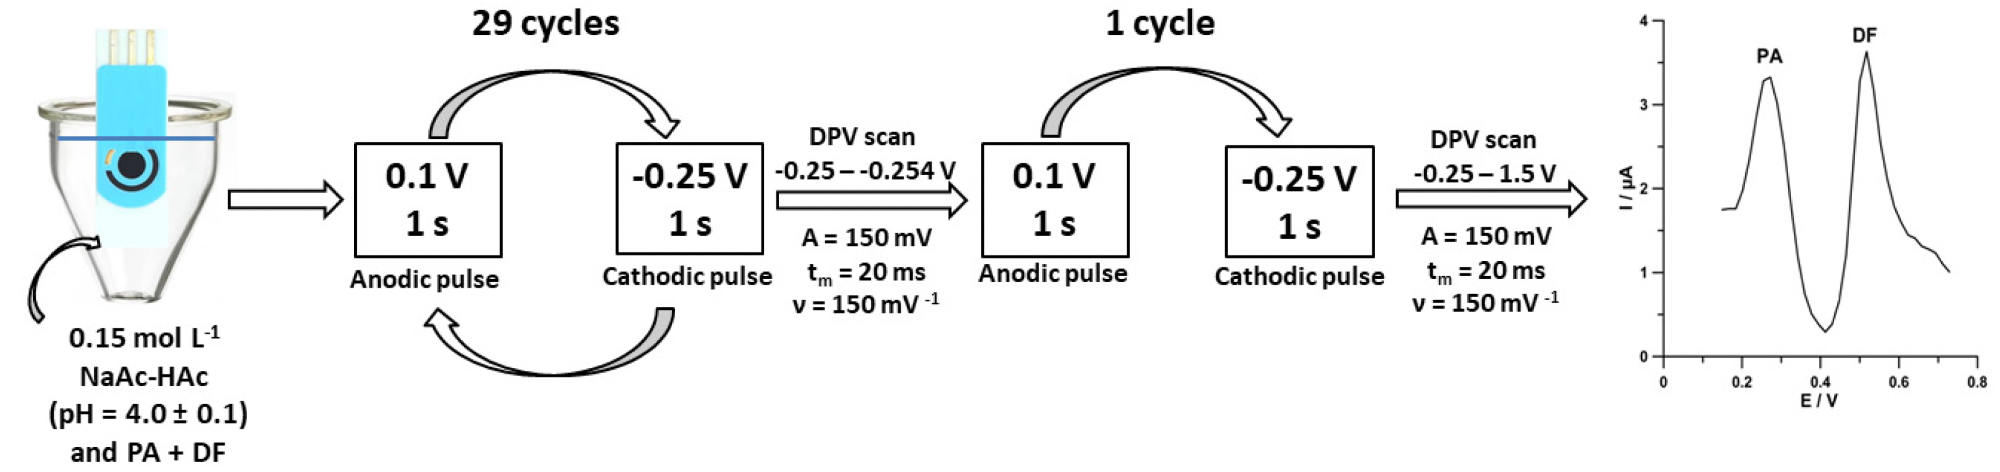 Scheme of voltammetric measurements of PA and DF at the SPCE/MWCNTs-COOH